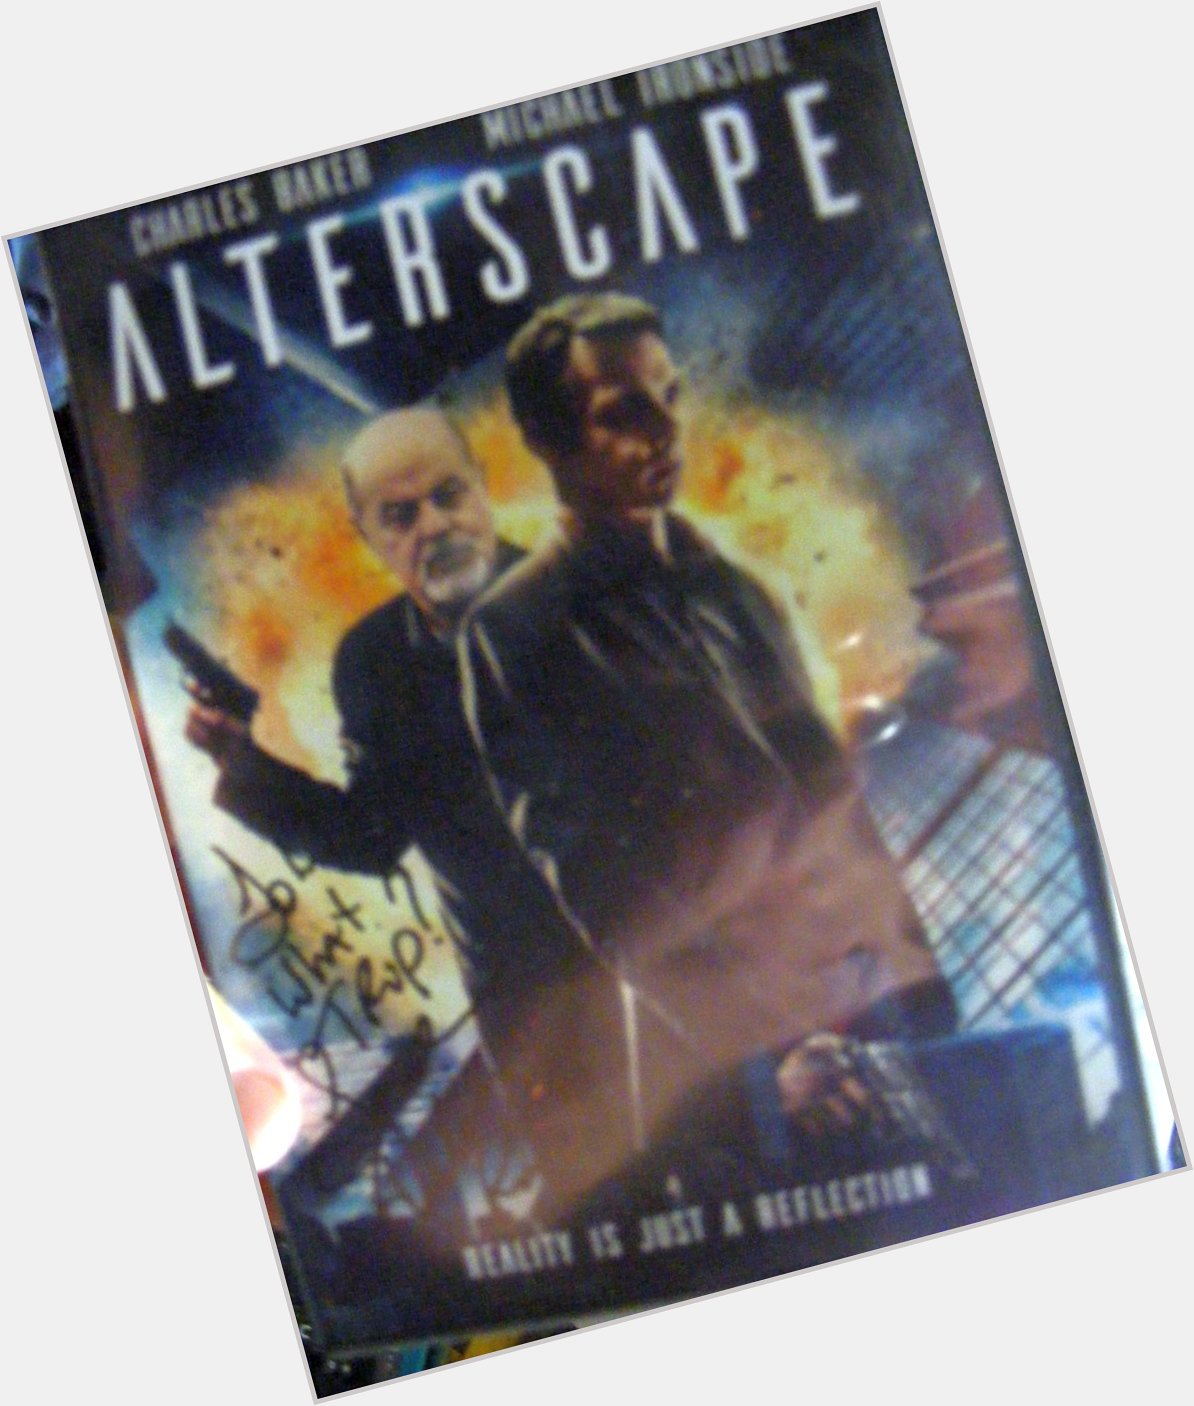  Alterscape! signed my DVD copy.  Happy 70th Birthday, Michael Ironside!  